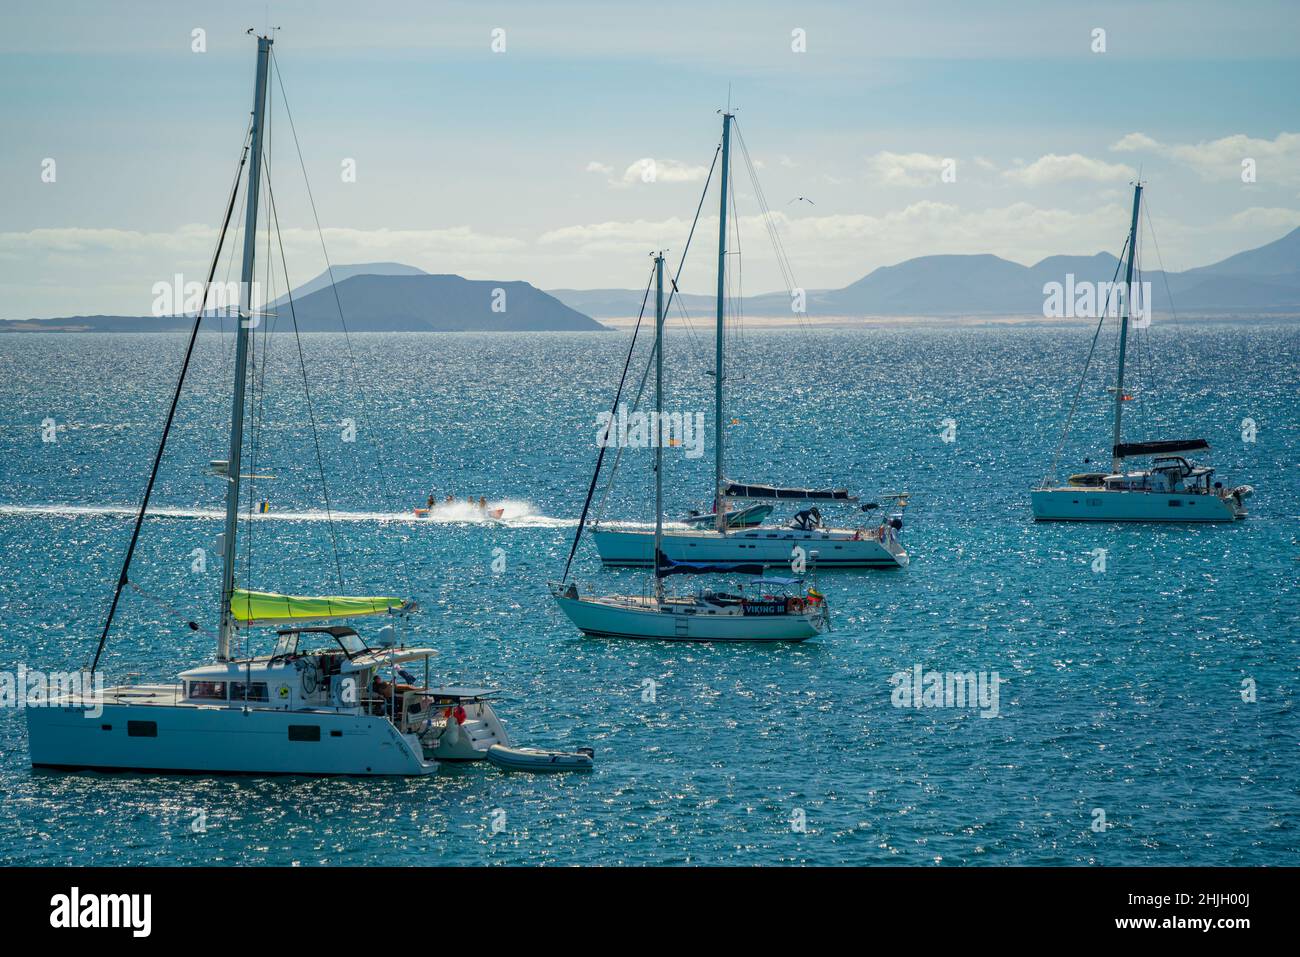 View of water skiing, sailboats and Fuerteventura in background, Playa Blanca, Lanzarote, Canary Islands, Spain, Atlantic, Europe Stock Photo